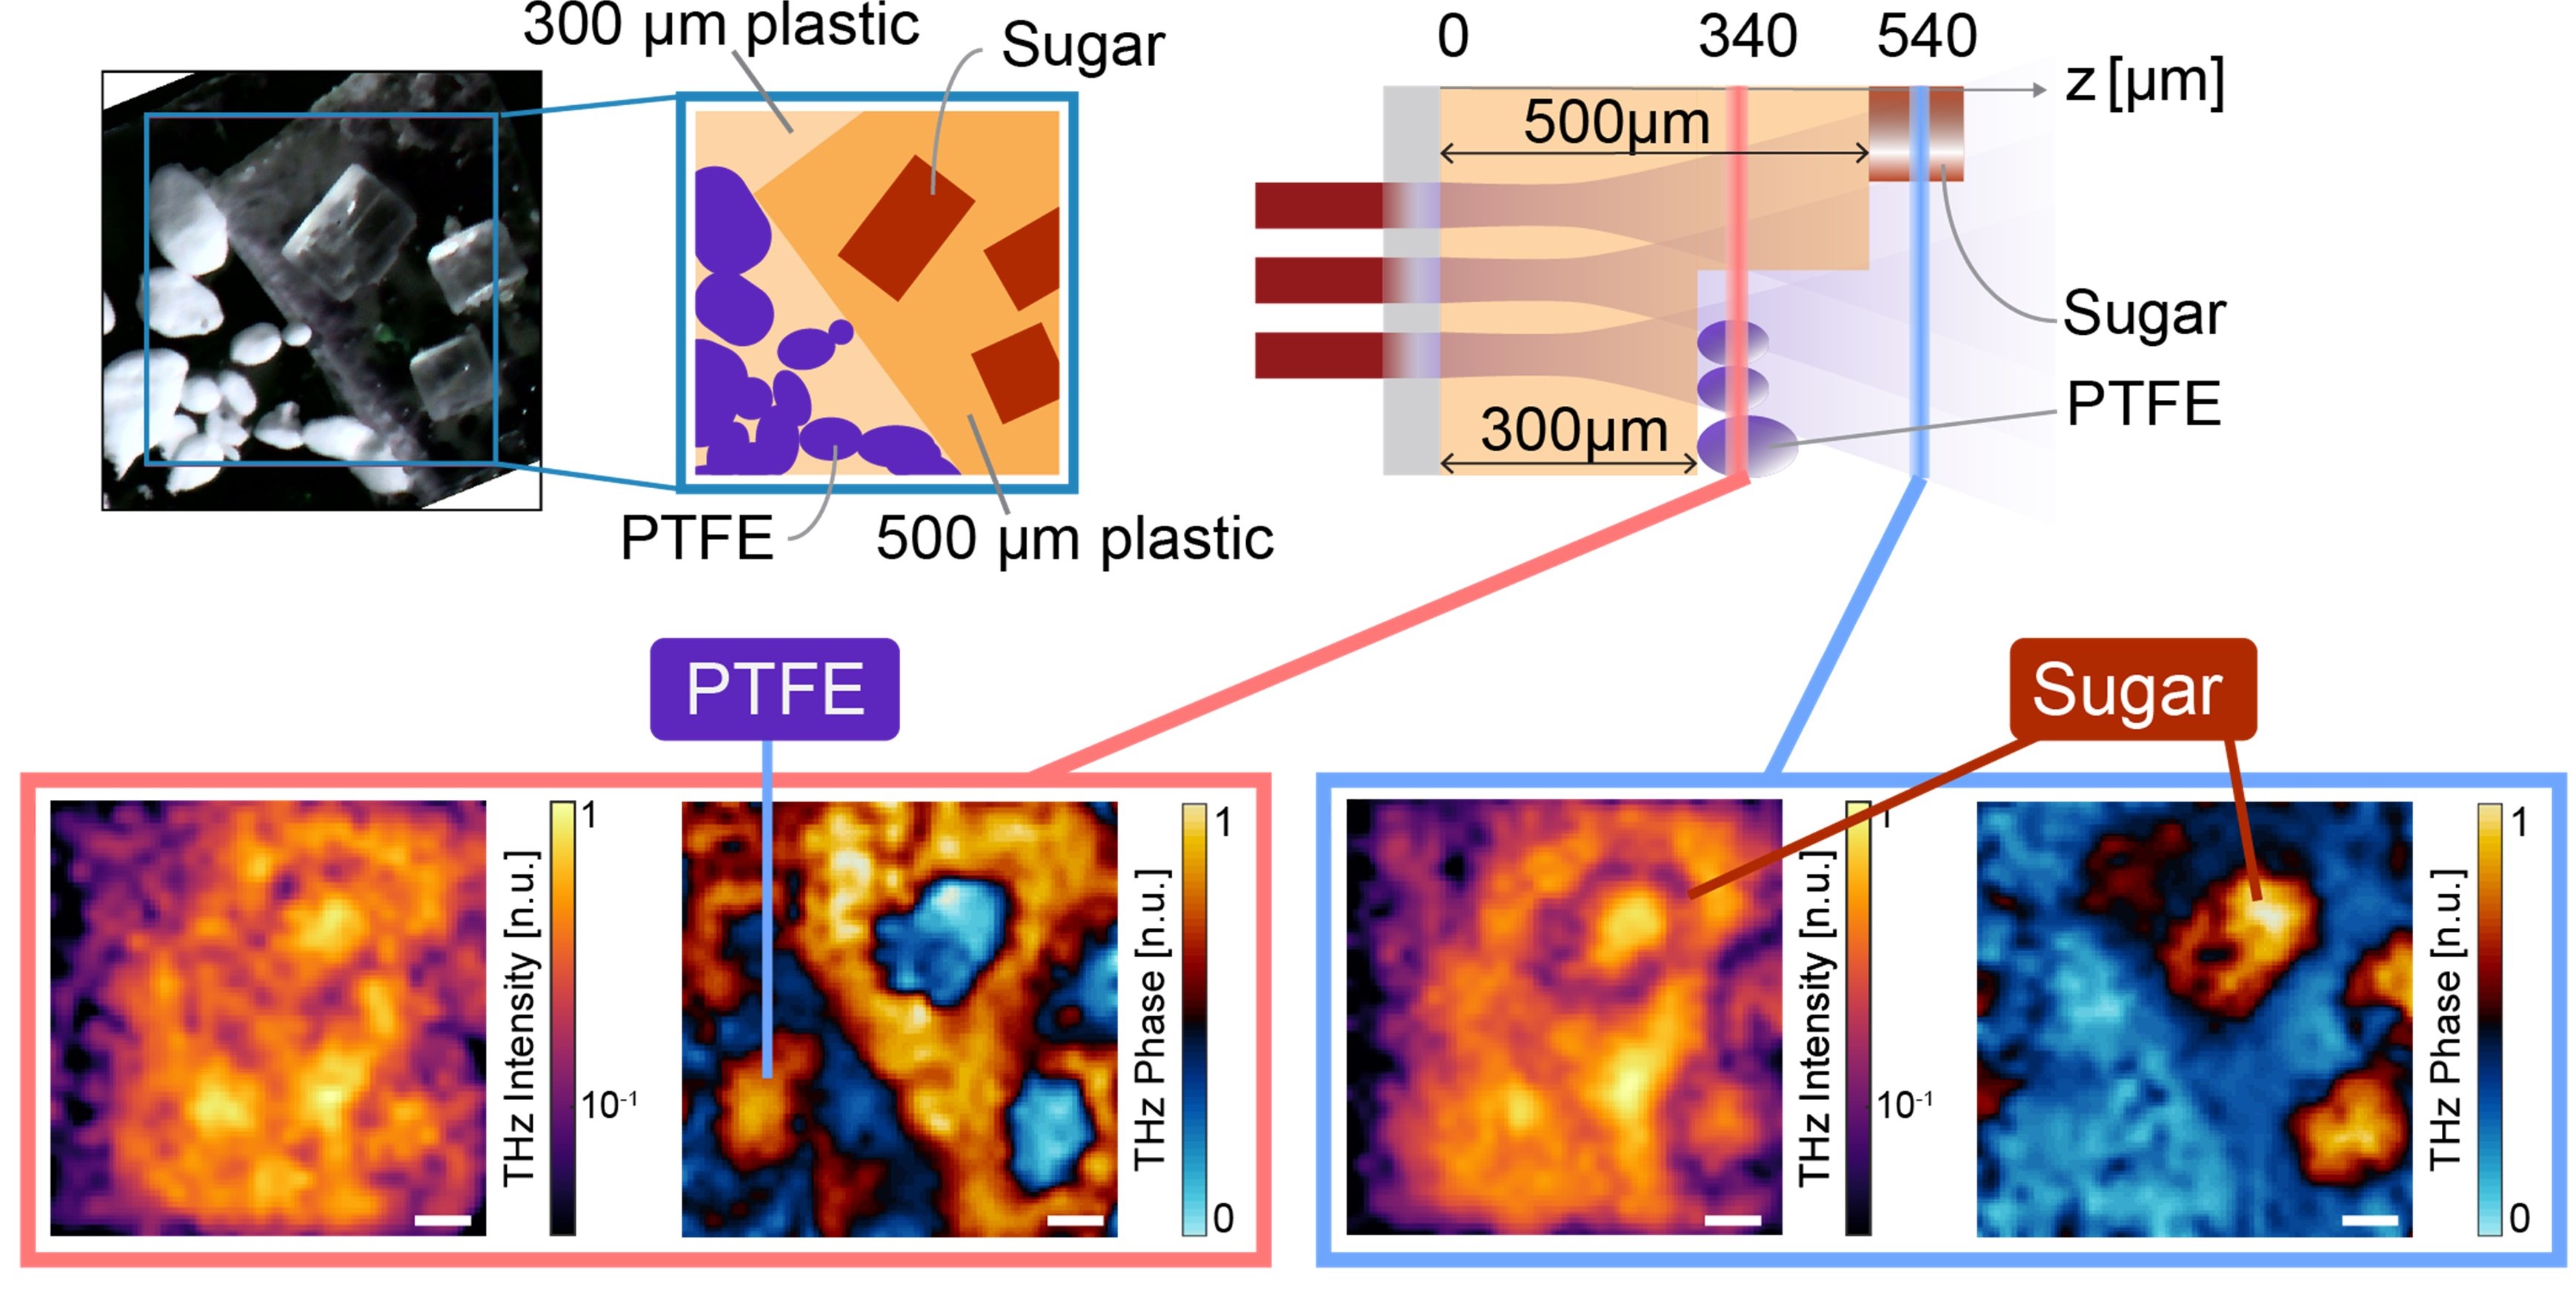 terahertz wave camera can capture 3D images of microscopic world